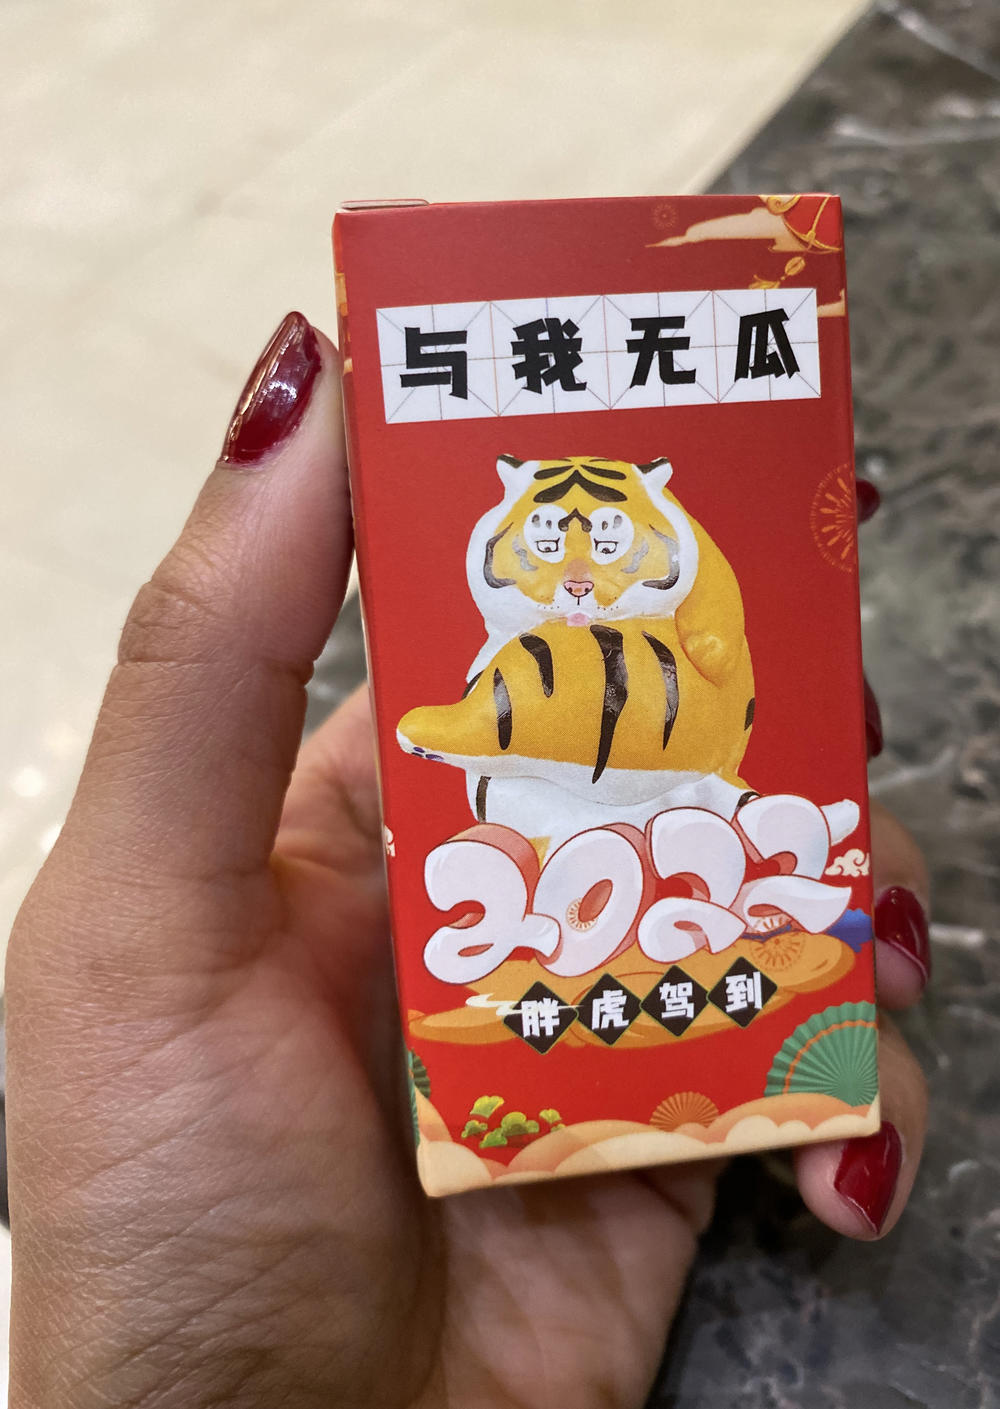 In honor of the Chinese Lunar New Year being celebrated within the tightly-controlled Beijing Olympics, volunteers gave out Year of the Tiger figurines to guests.